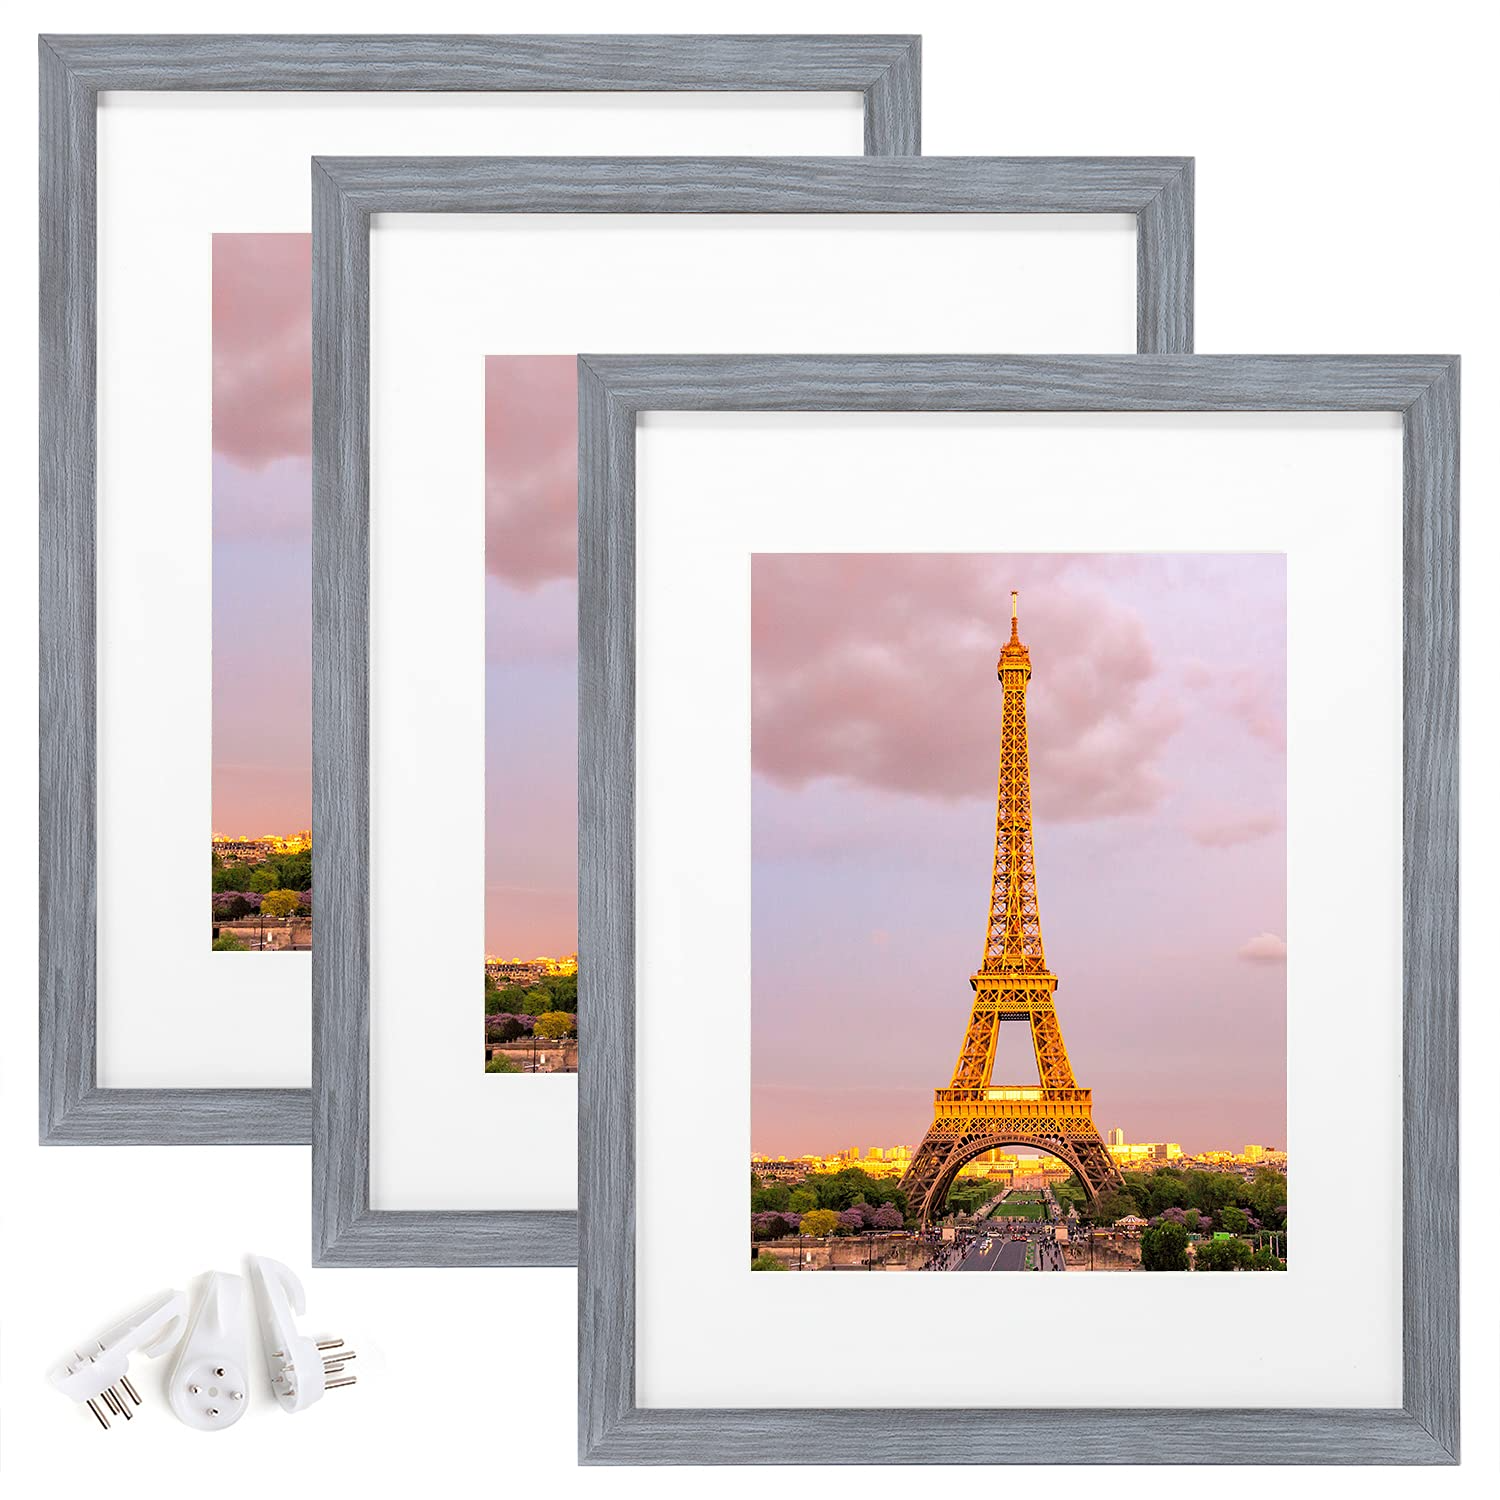 upsimples 9x12 Picture Frame Set of 3,Made of High Definition Glass for 6x8  with Mat or 9x12 Without Mat,Wall Mounting Photo Frame Gold